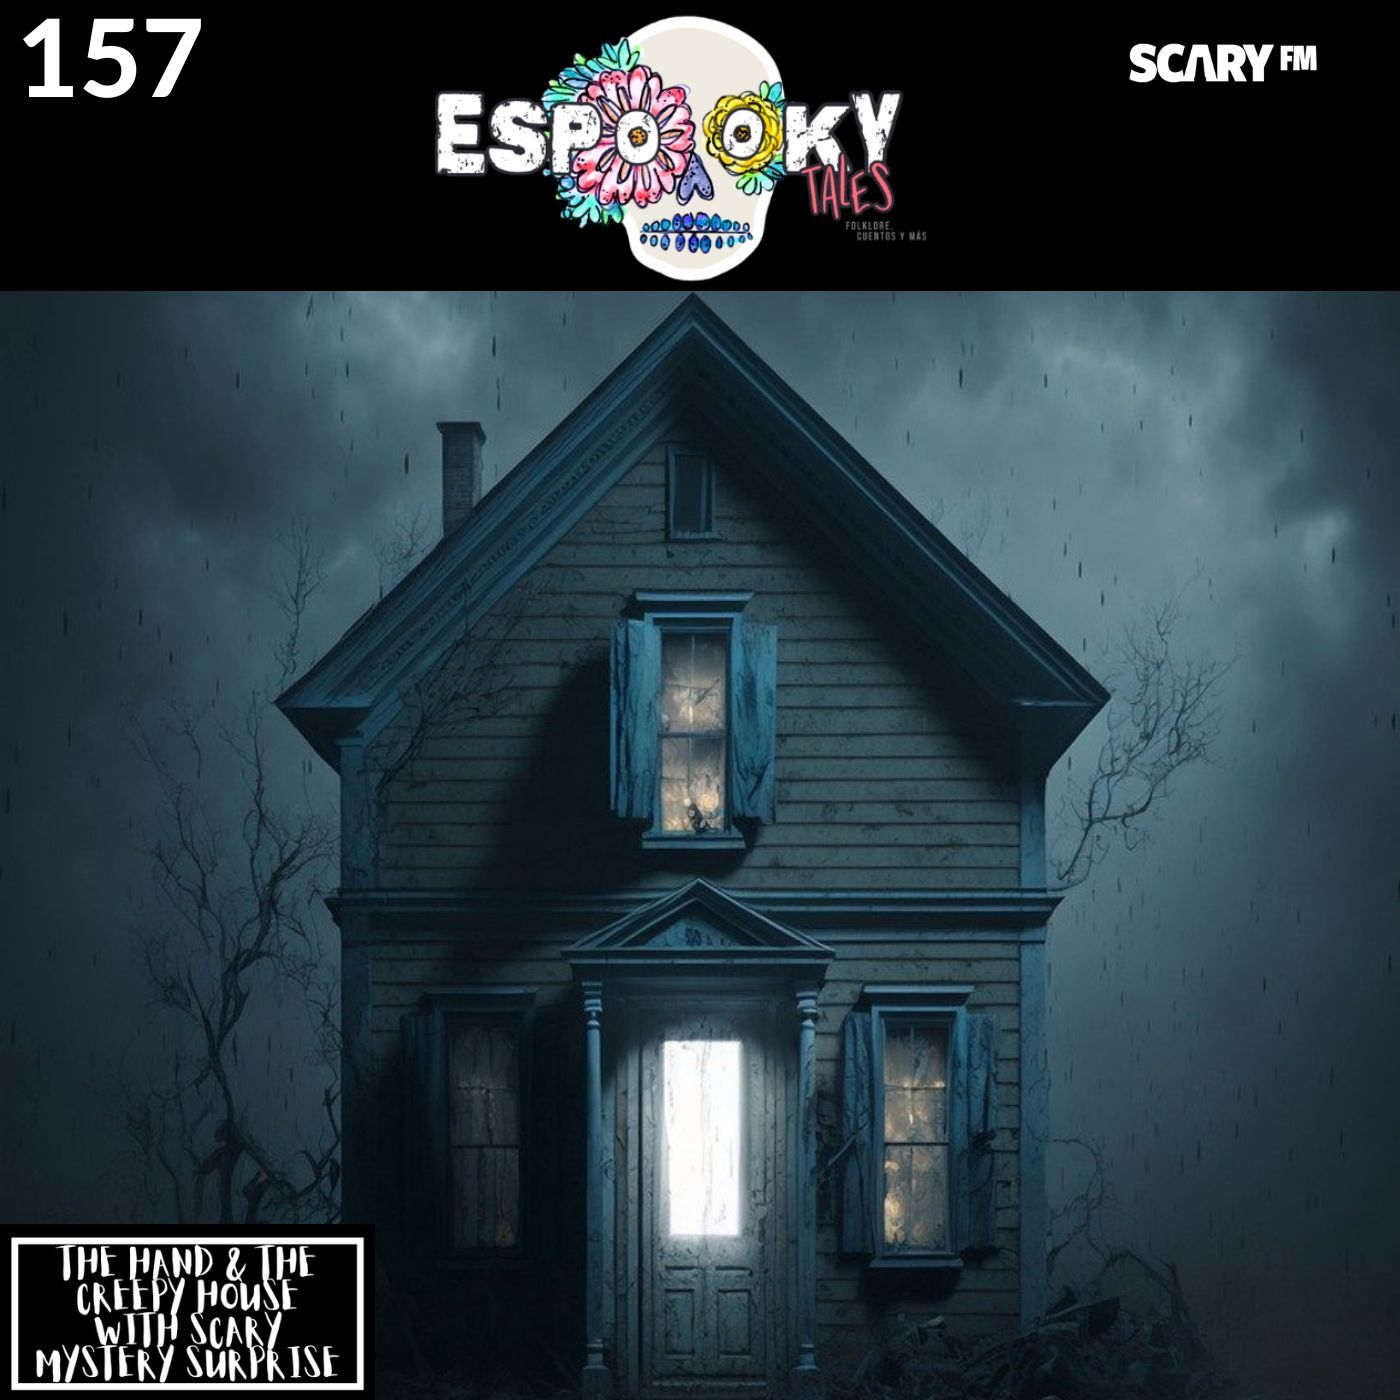 The Hand and the Creepy House with Scary Mystery Surprise